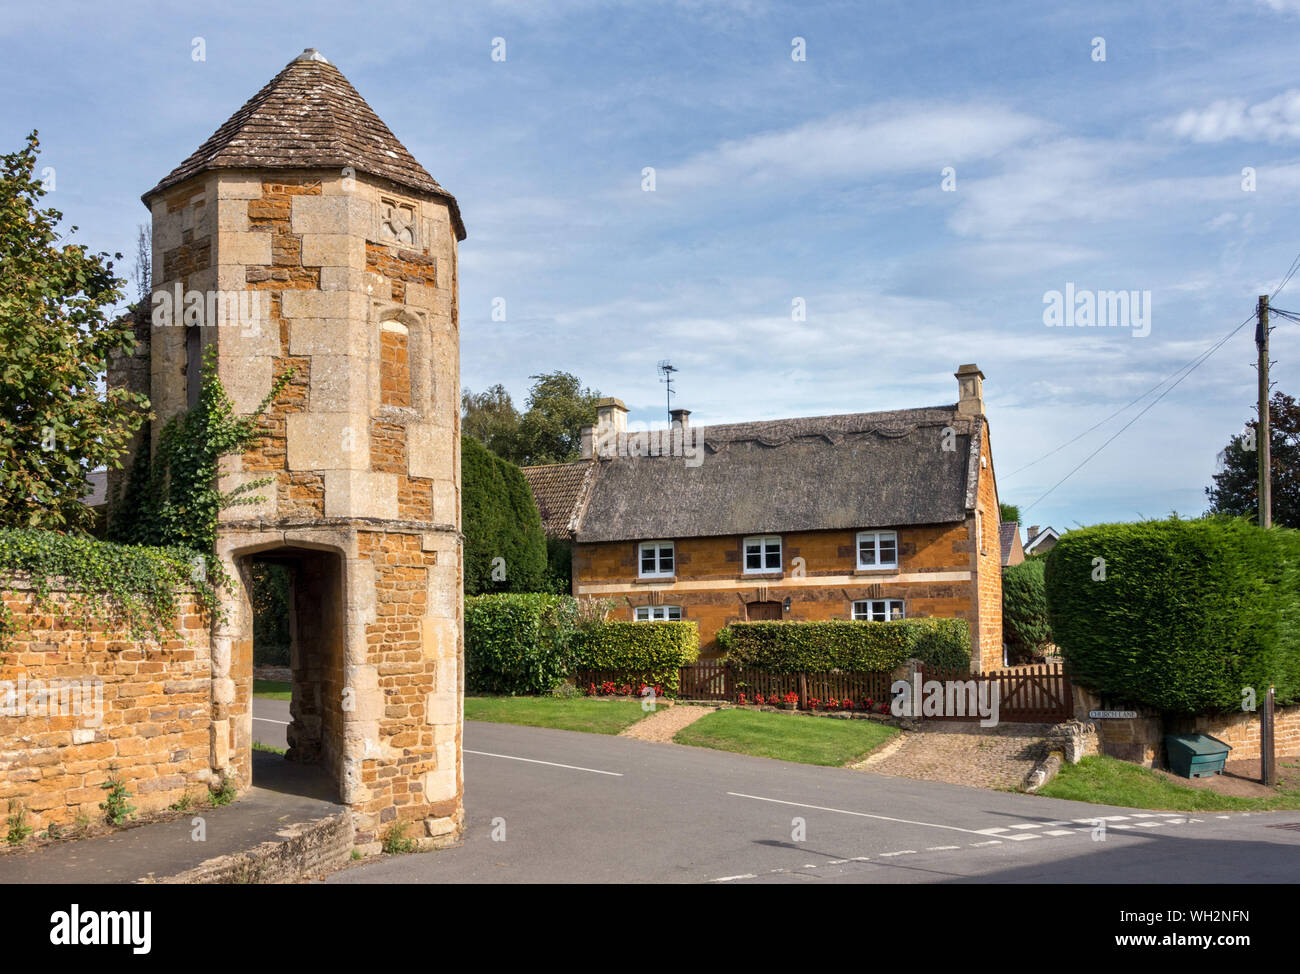 C15 Bishops Eye watchtower gazebo with passageway and pretty stone cottage with thatched roof, Church Street, Lyddington, Rutland, England, UK Stock Photo